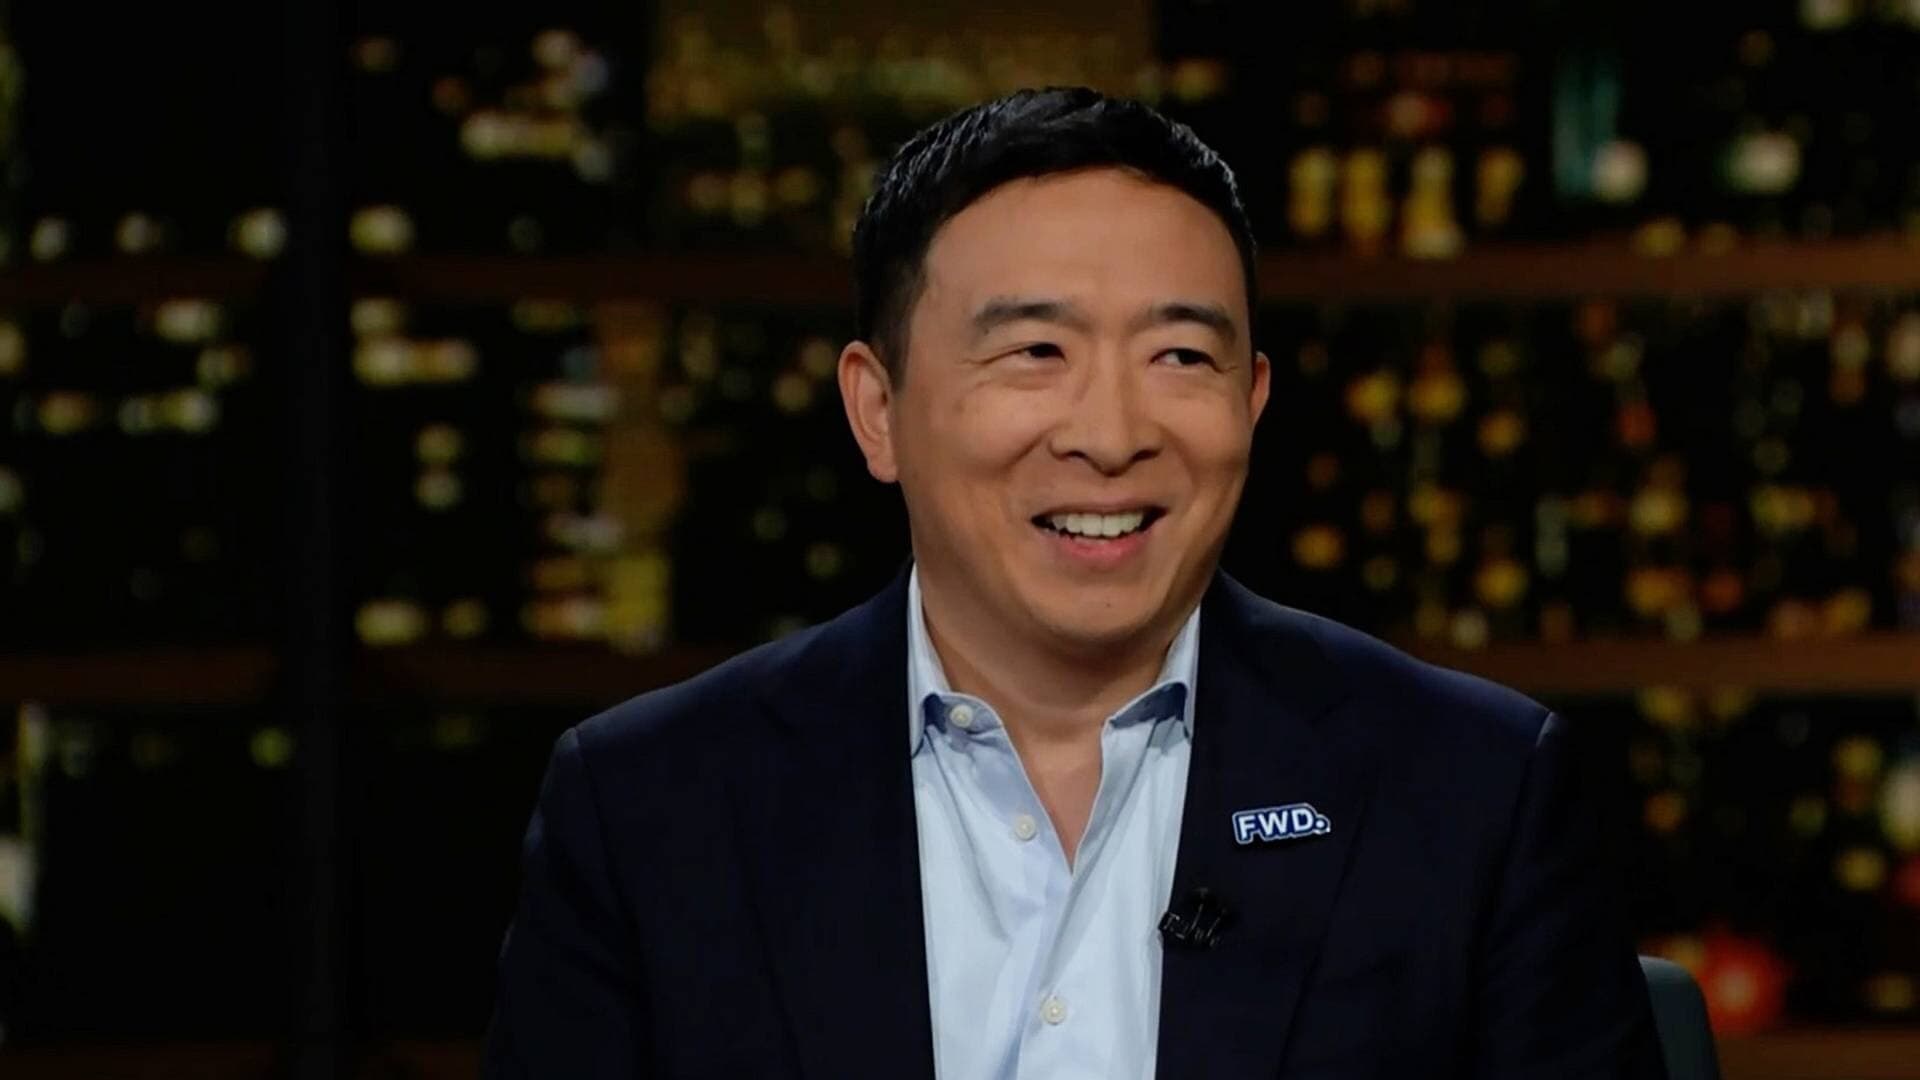 Real Time with Bill Maher - Season 20 Episode 10 : April 1, 2022: Nicole Perlroth, Laura Coates, Andrew Yang (1970)